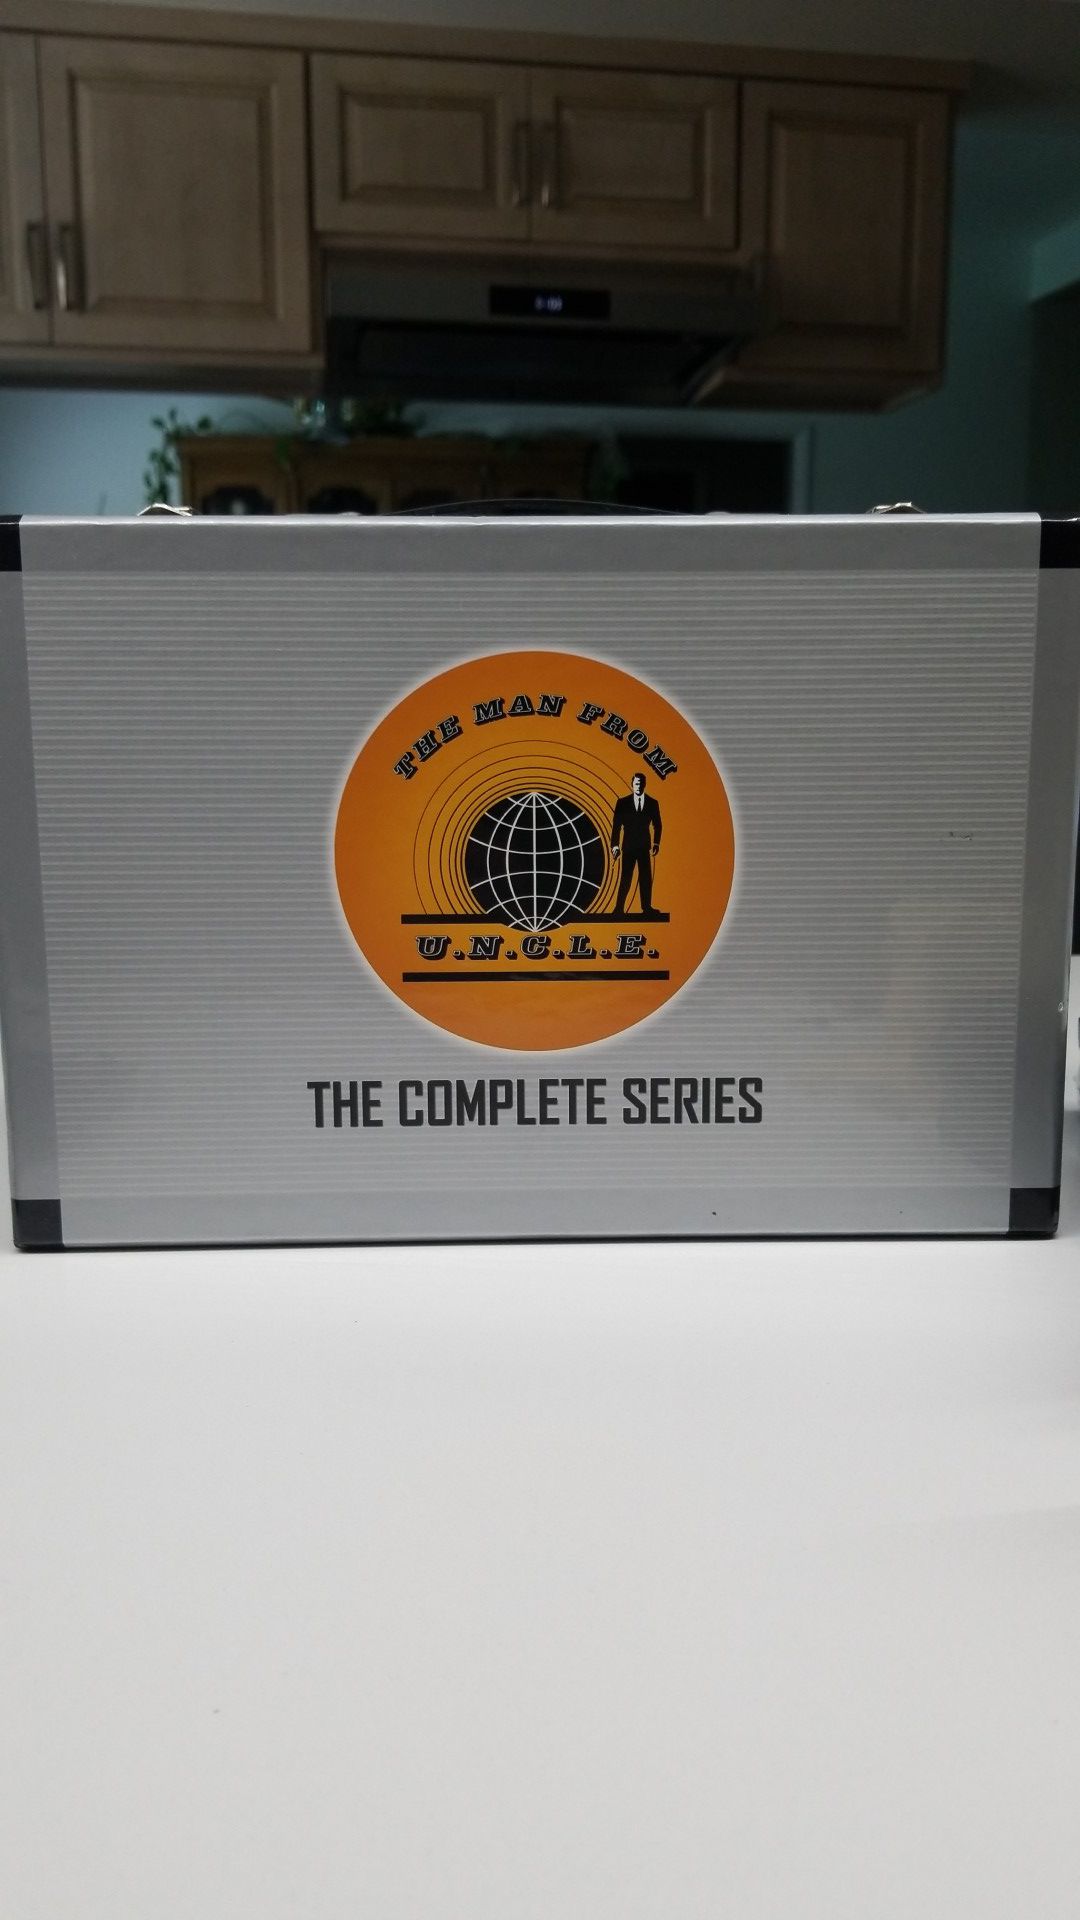 The Man from U. N. C. L. E complete series.